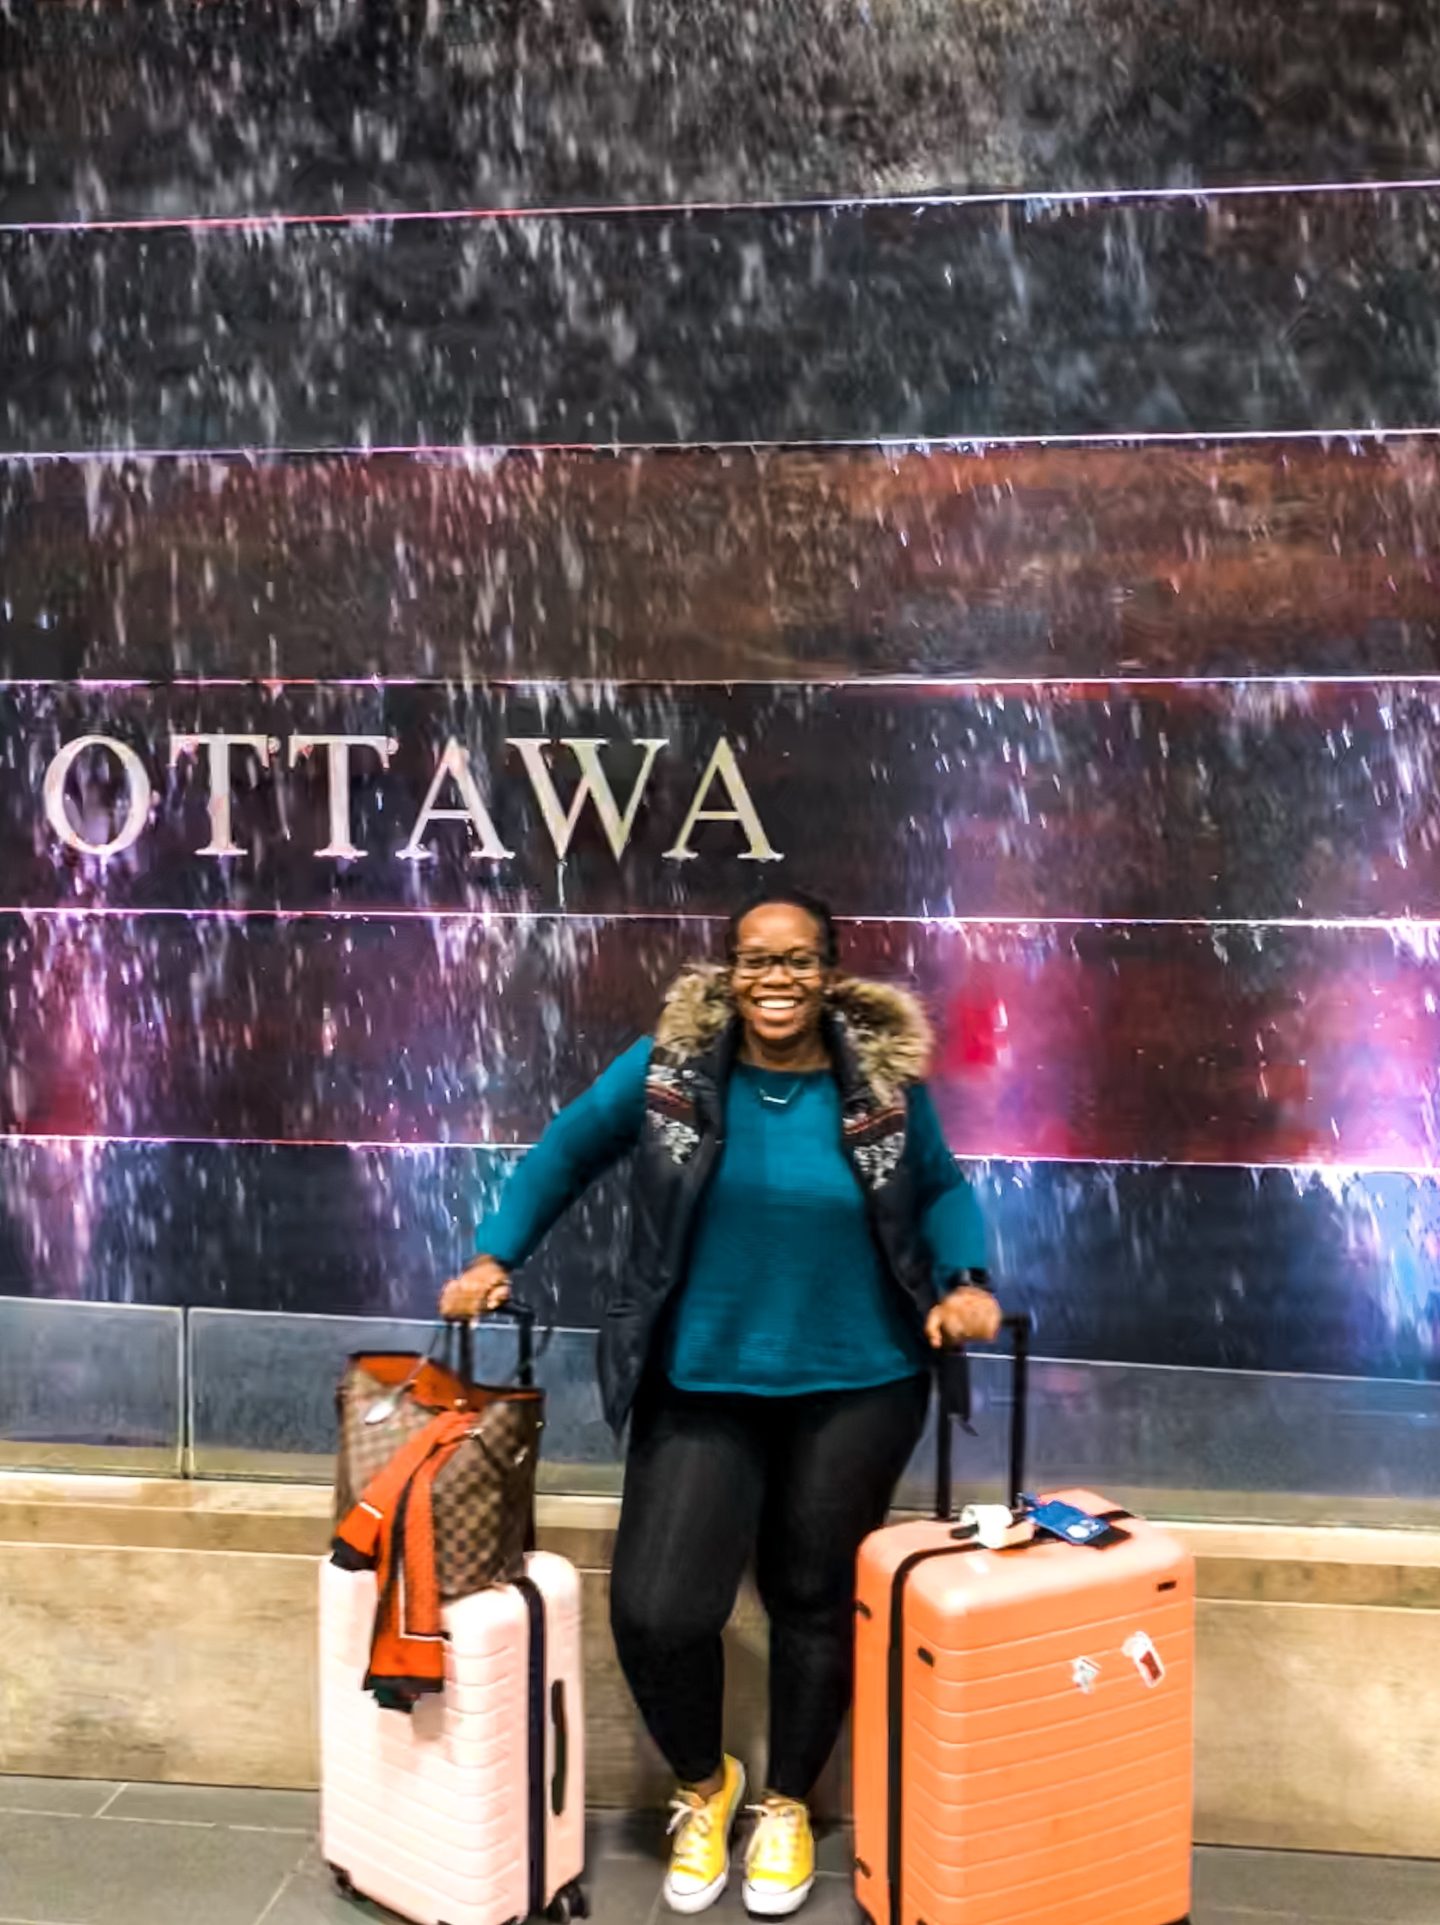 African blogger based in Boston Binja the Africancocktail in front of Ottawa sign in Canada